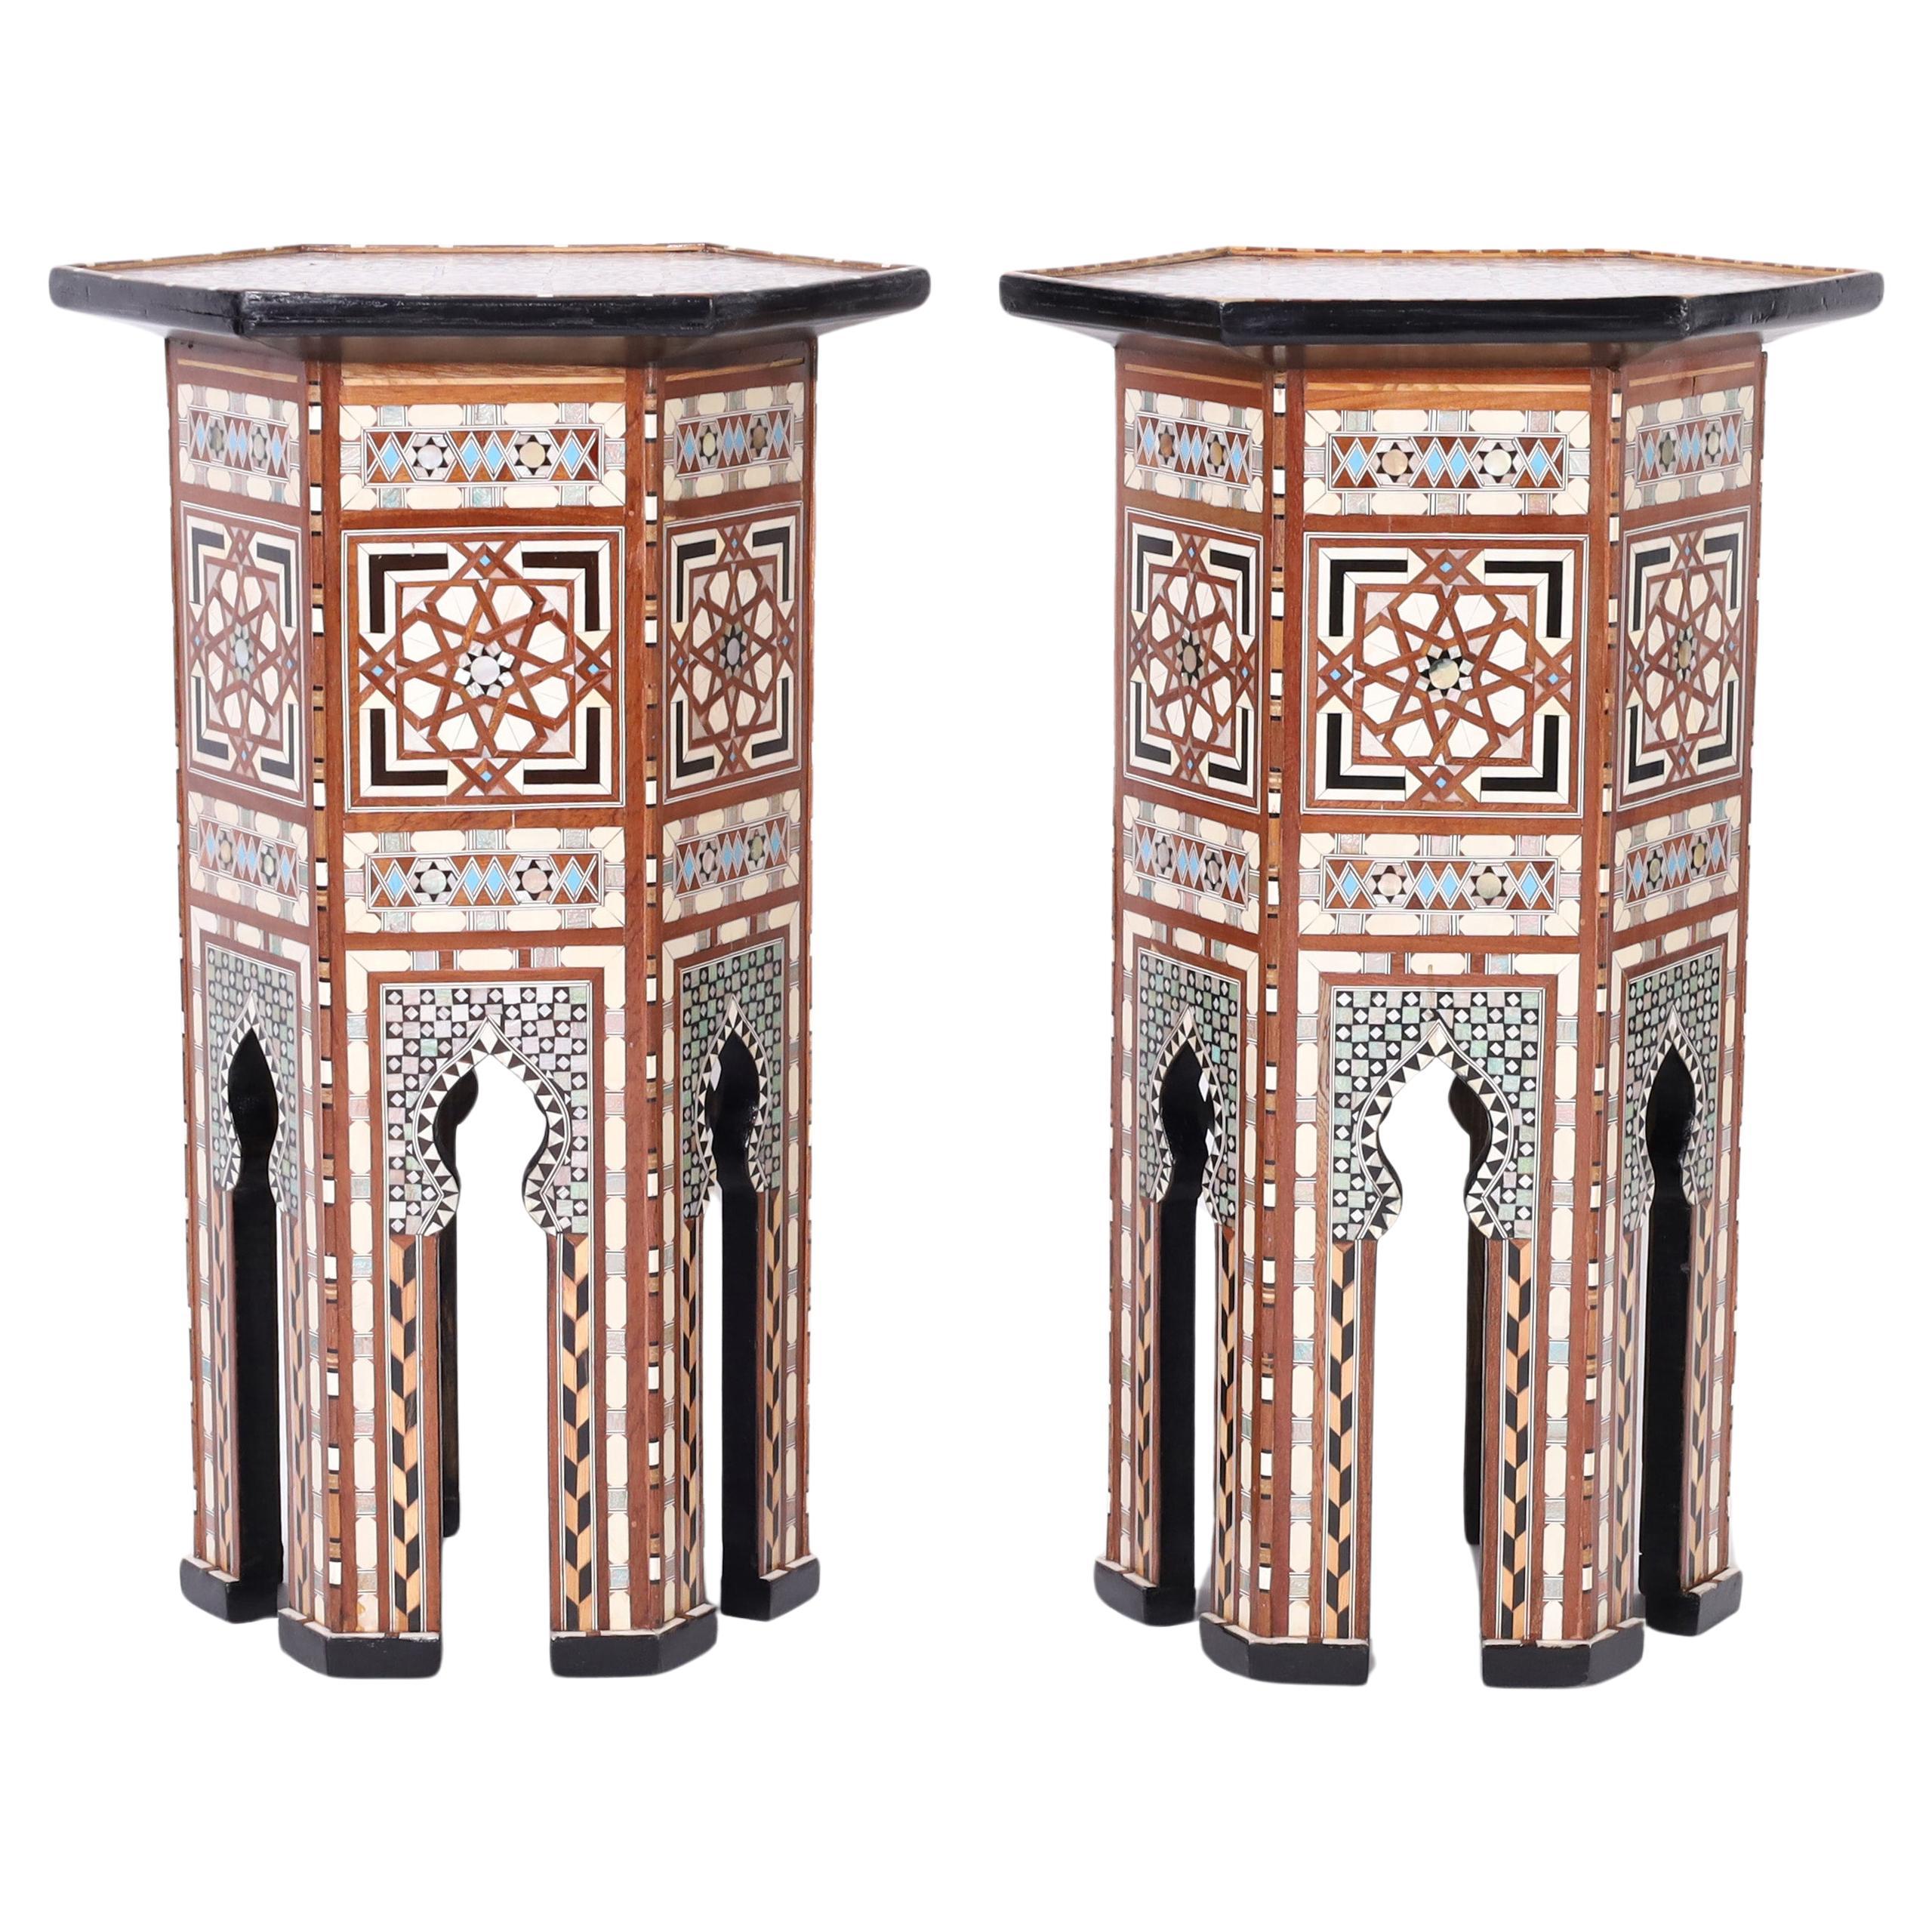  Pair of Moroccan Stands or Tables